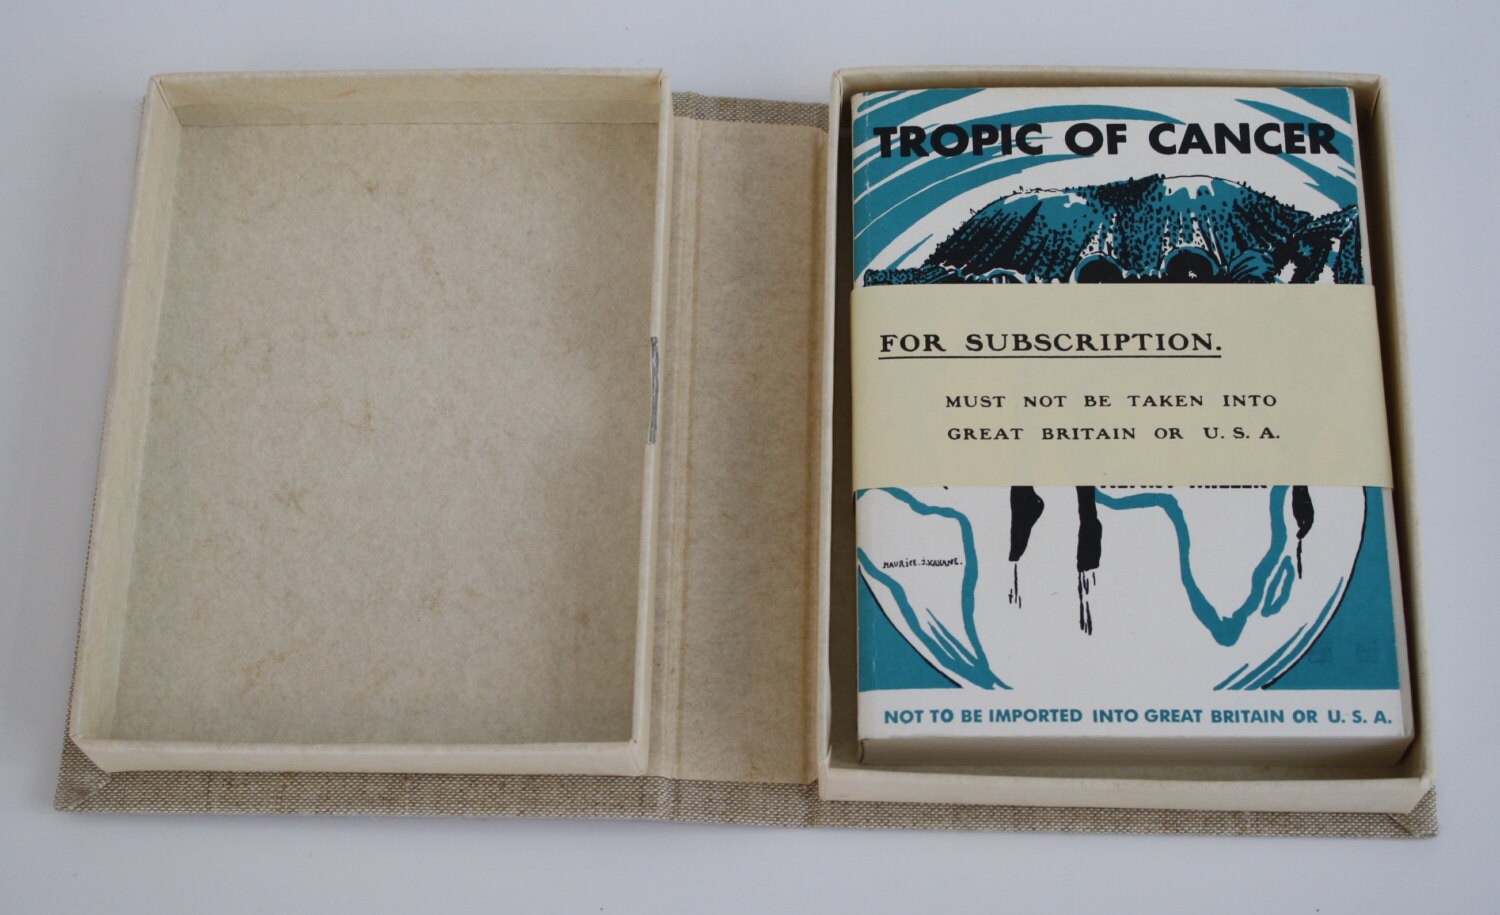 TROPIC OF CANCER by MILLER HENRY - First Edition - 1934 